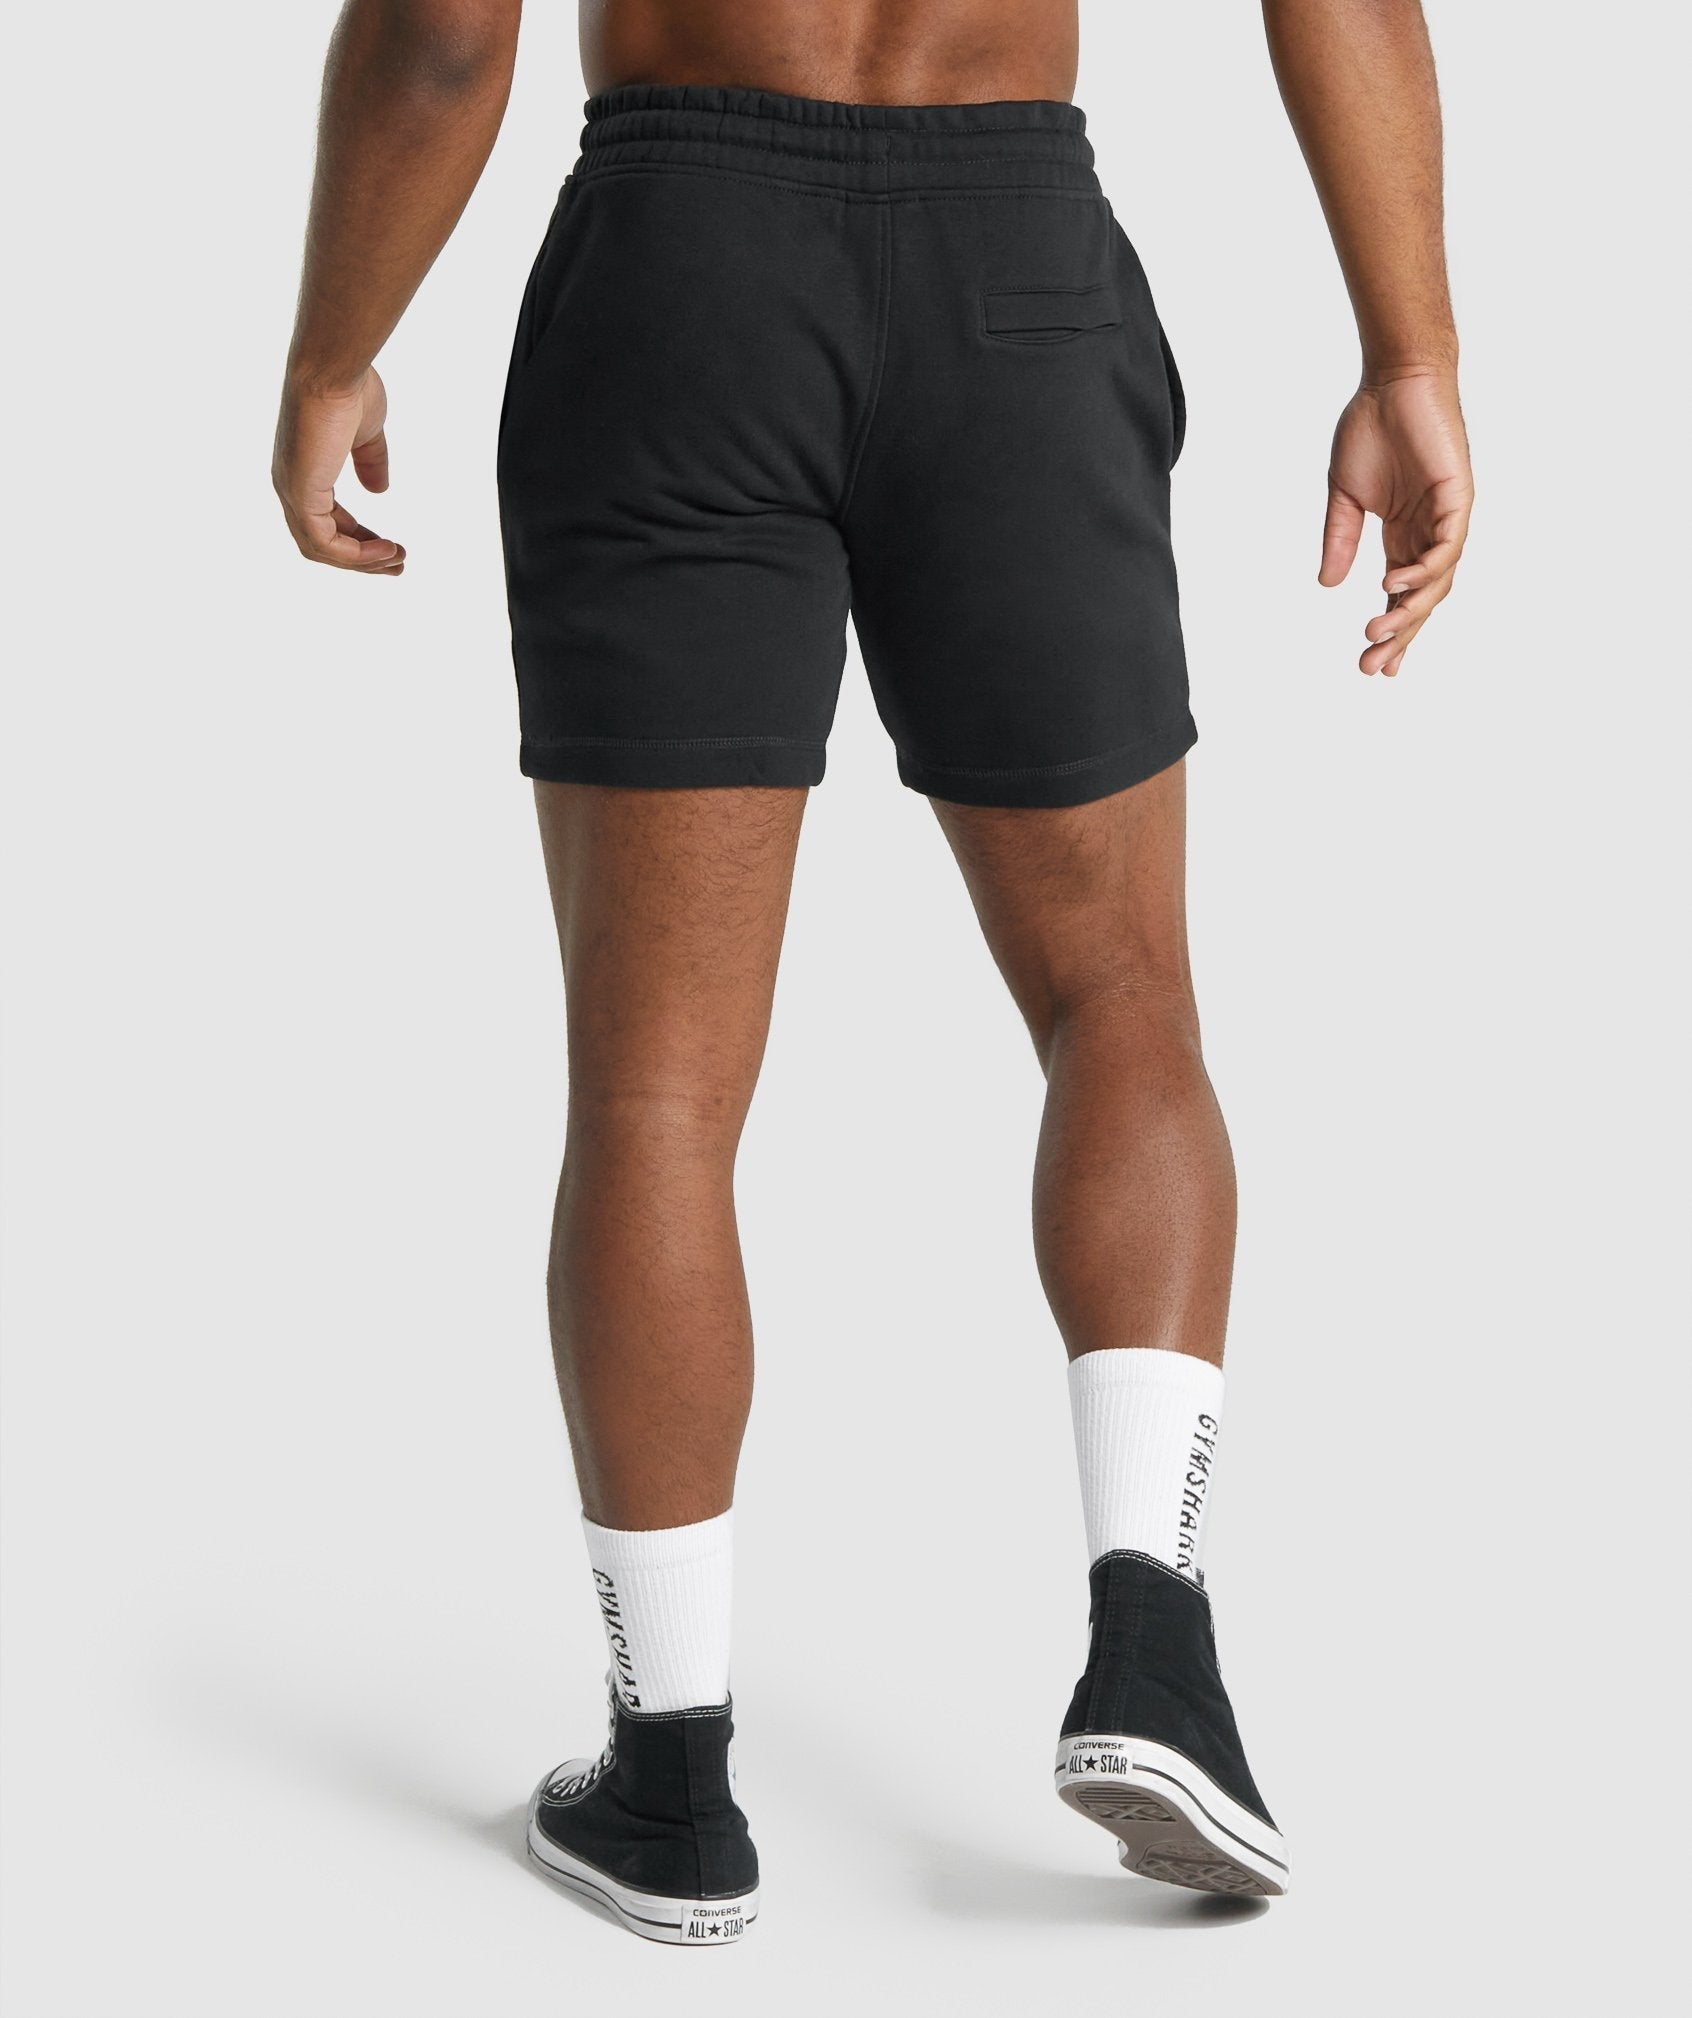 What Are Gym Shorts Called?– Thermajohn